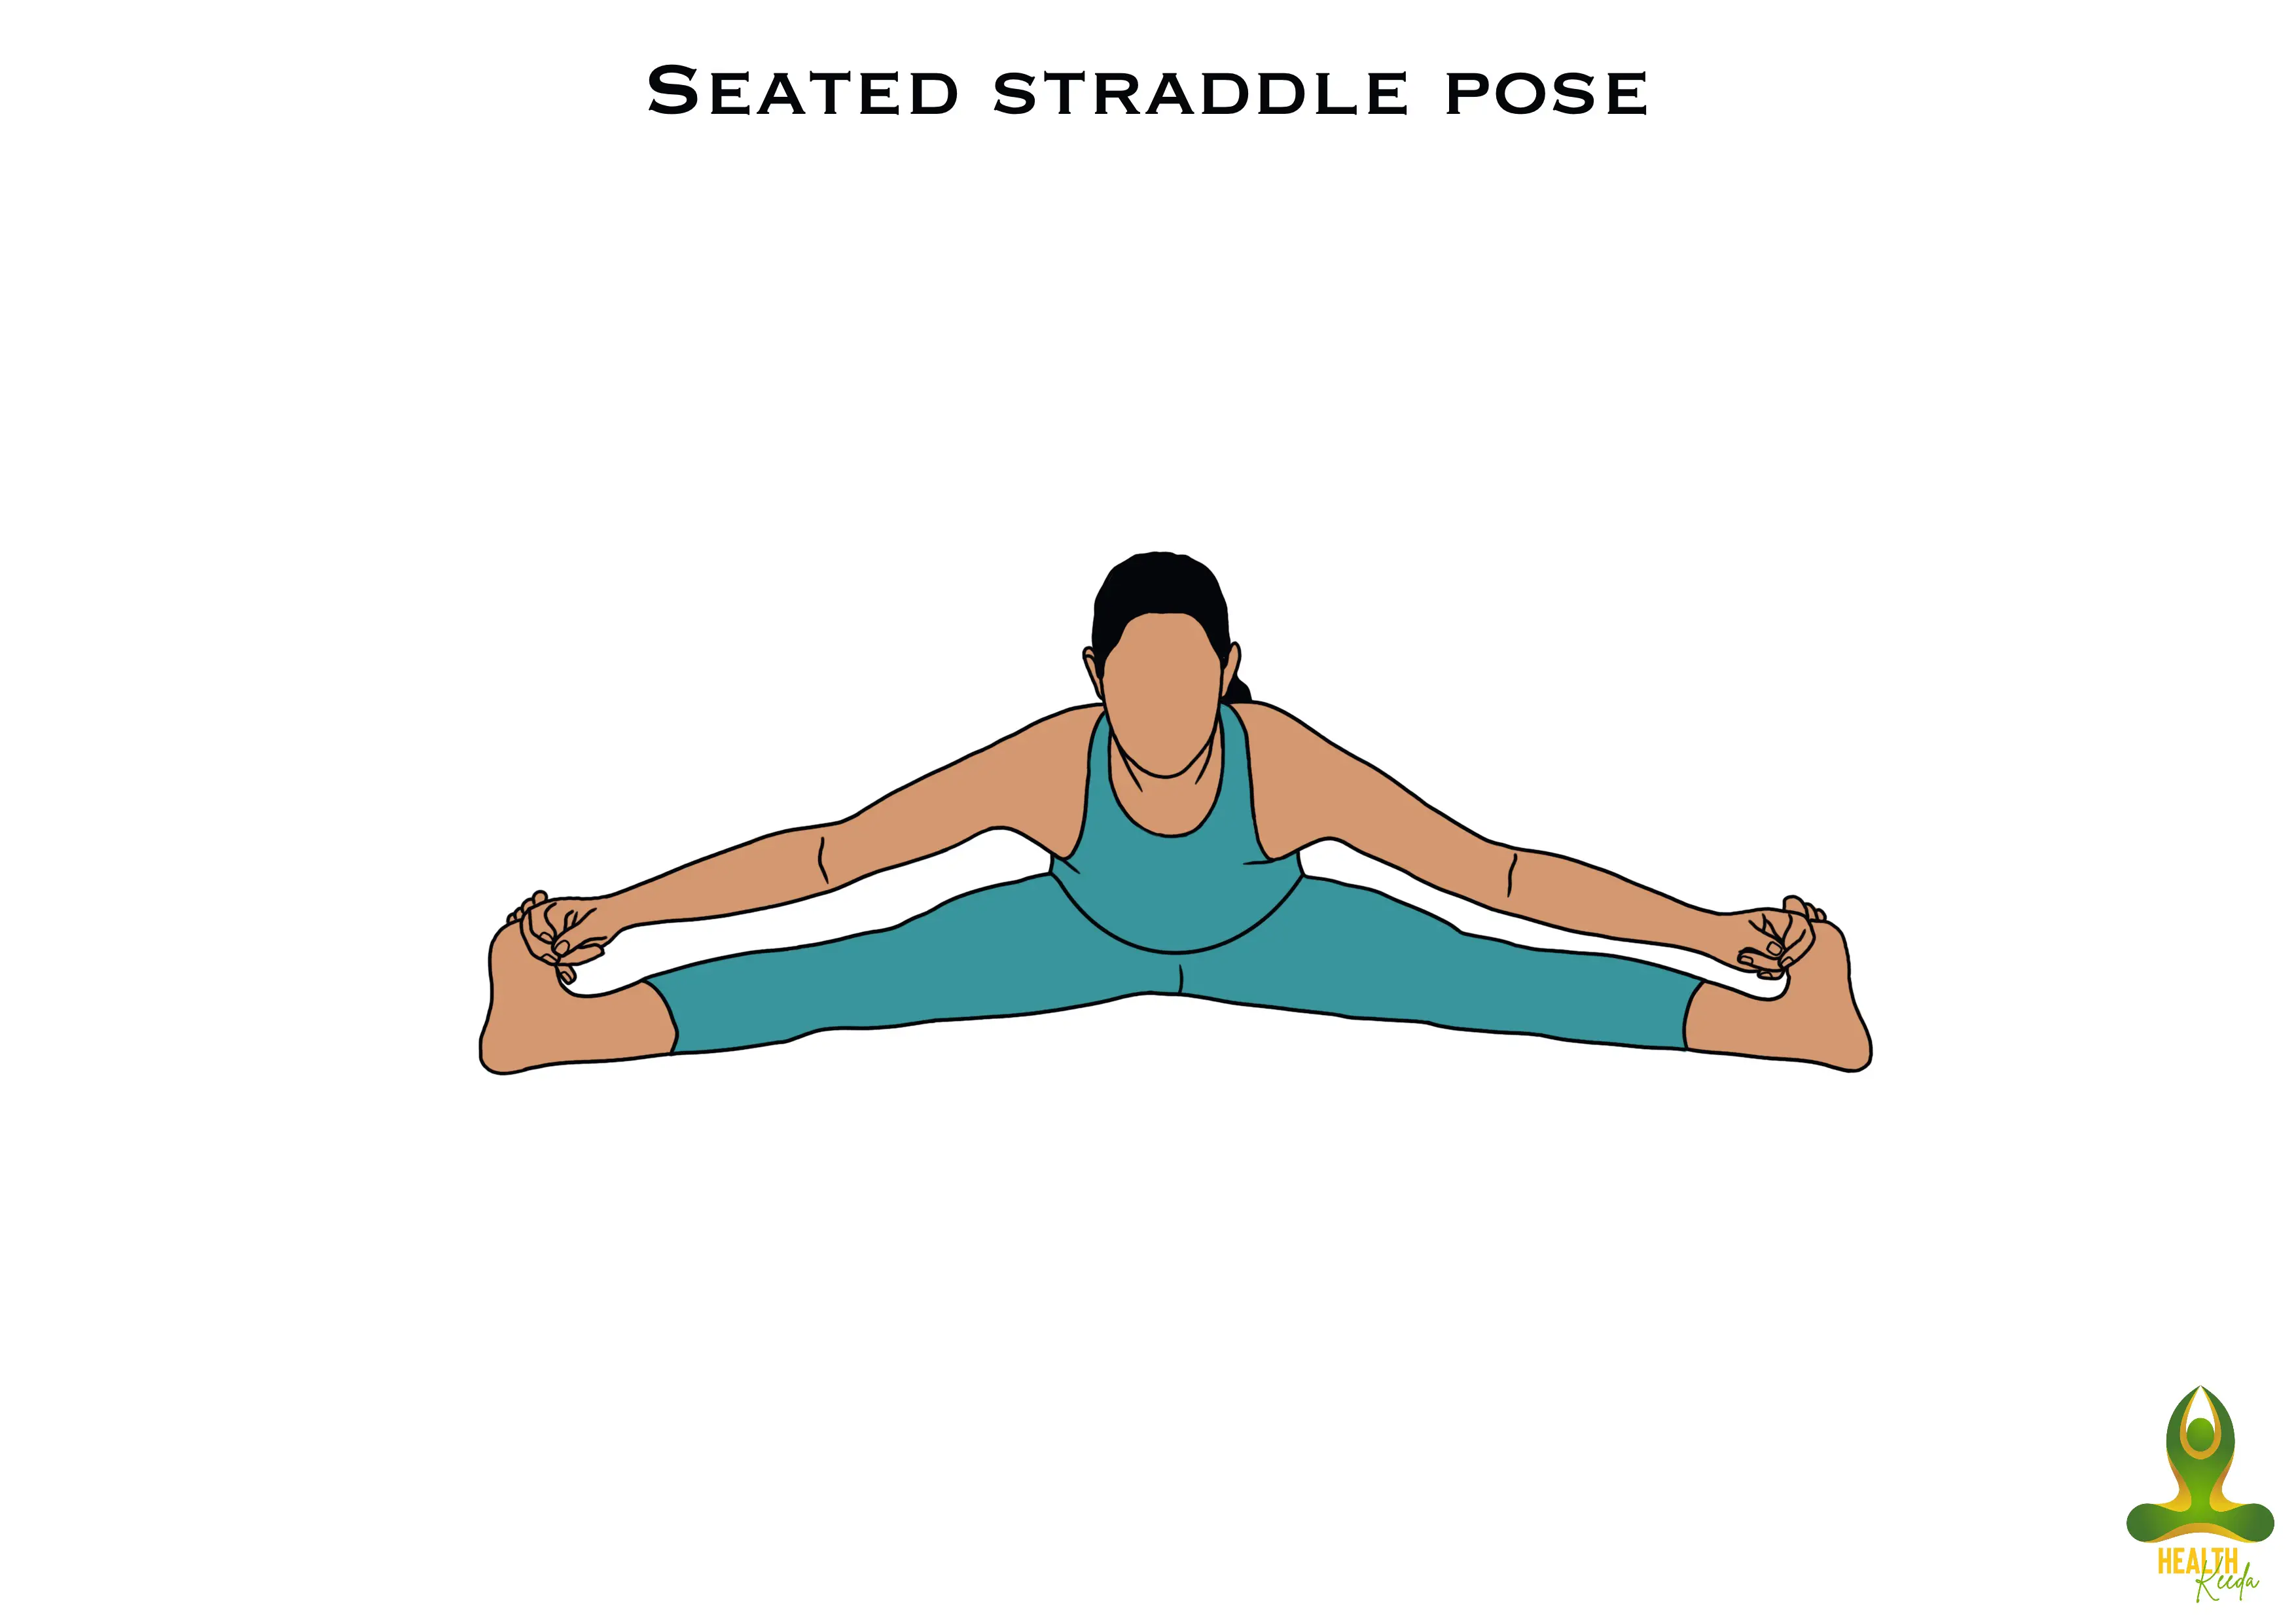 Seated straddle pose - yoga for back